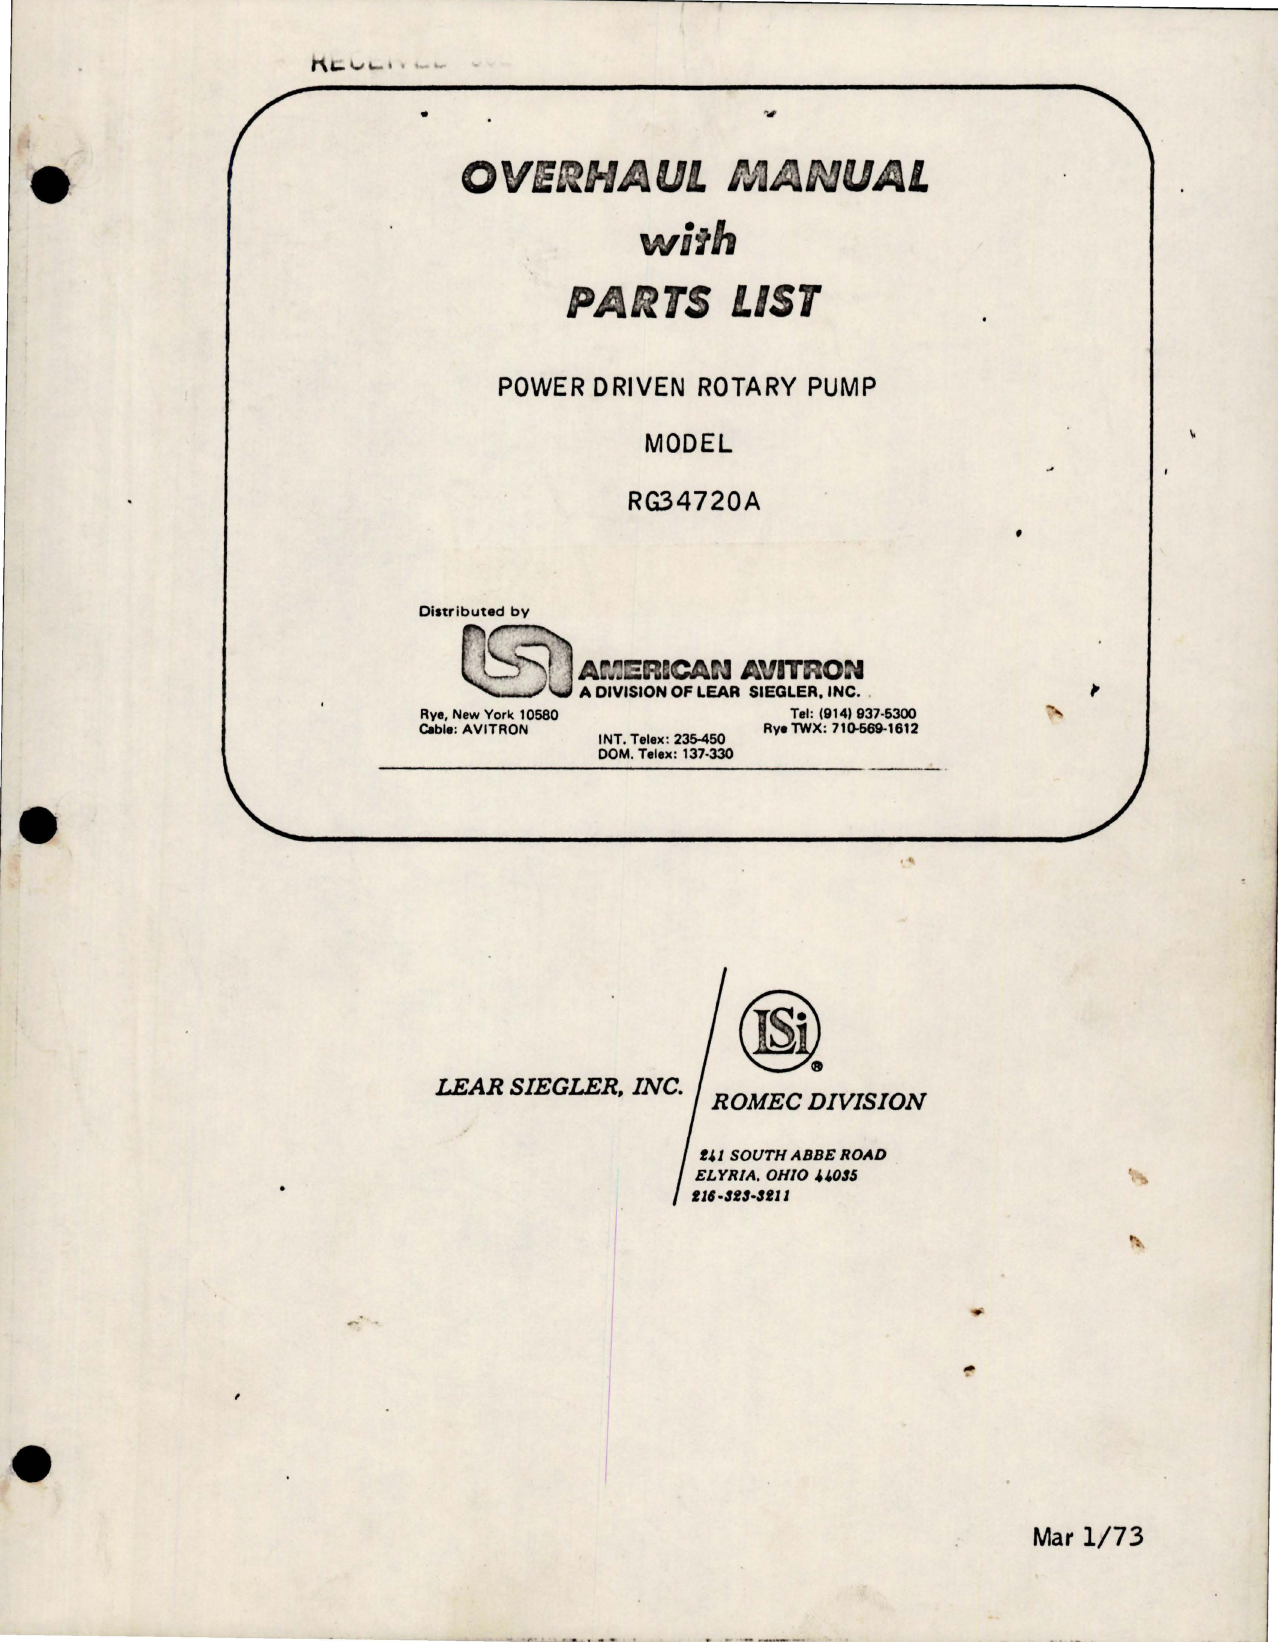 Sample page 1 from AirCorps Library document: Overhaul with Parts List for Power Driven Rotary Pump - Model RG34720A 